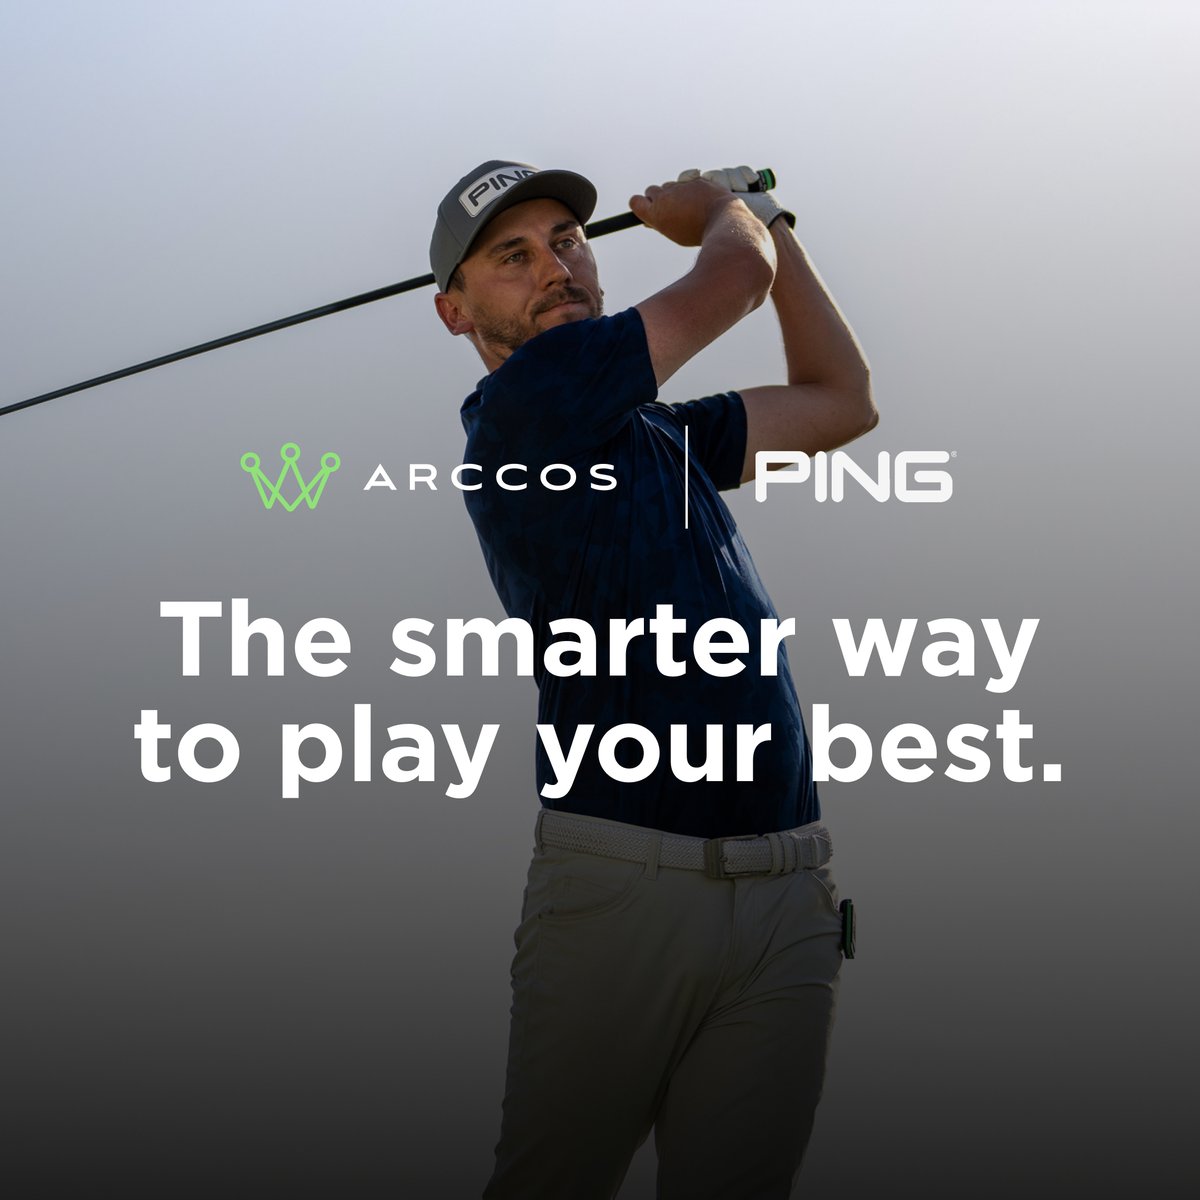 New @ArccosGolf members improve by an average of 5.78 strokes in their first year. 📈 And, as a PING player, you can join the Arccos community for FREE. Get free sensors, a free trial, and 50% off Arccos Link: bit.ly/3eEtqS8